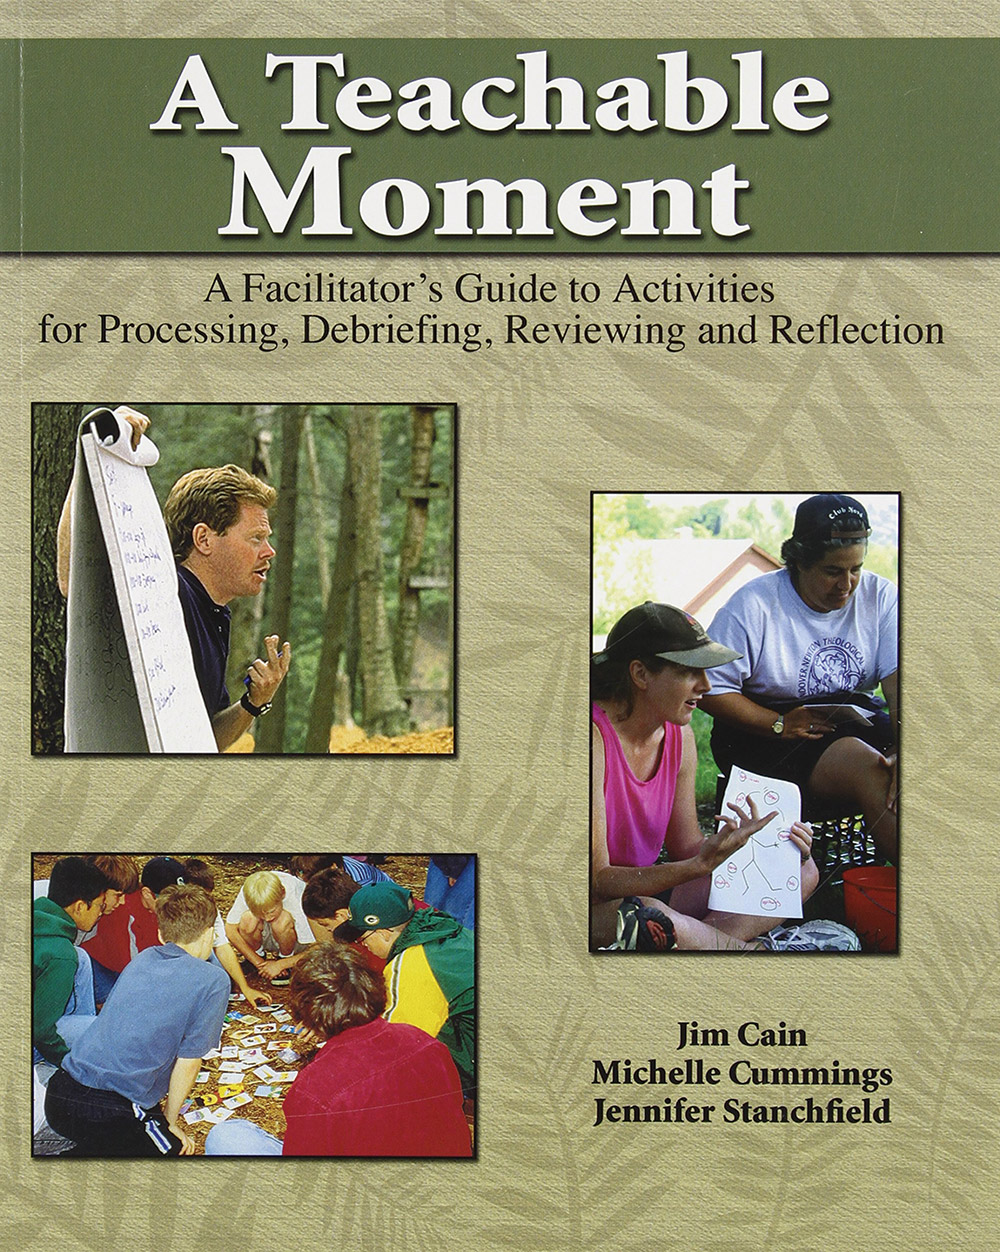 A Teachable Moment: A Facilitator’s Guide to Activities for Processing, Debriefing, Reviewing and Reflecting